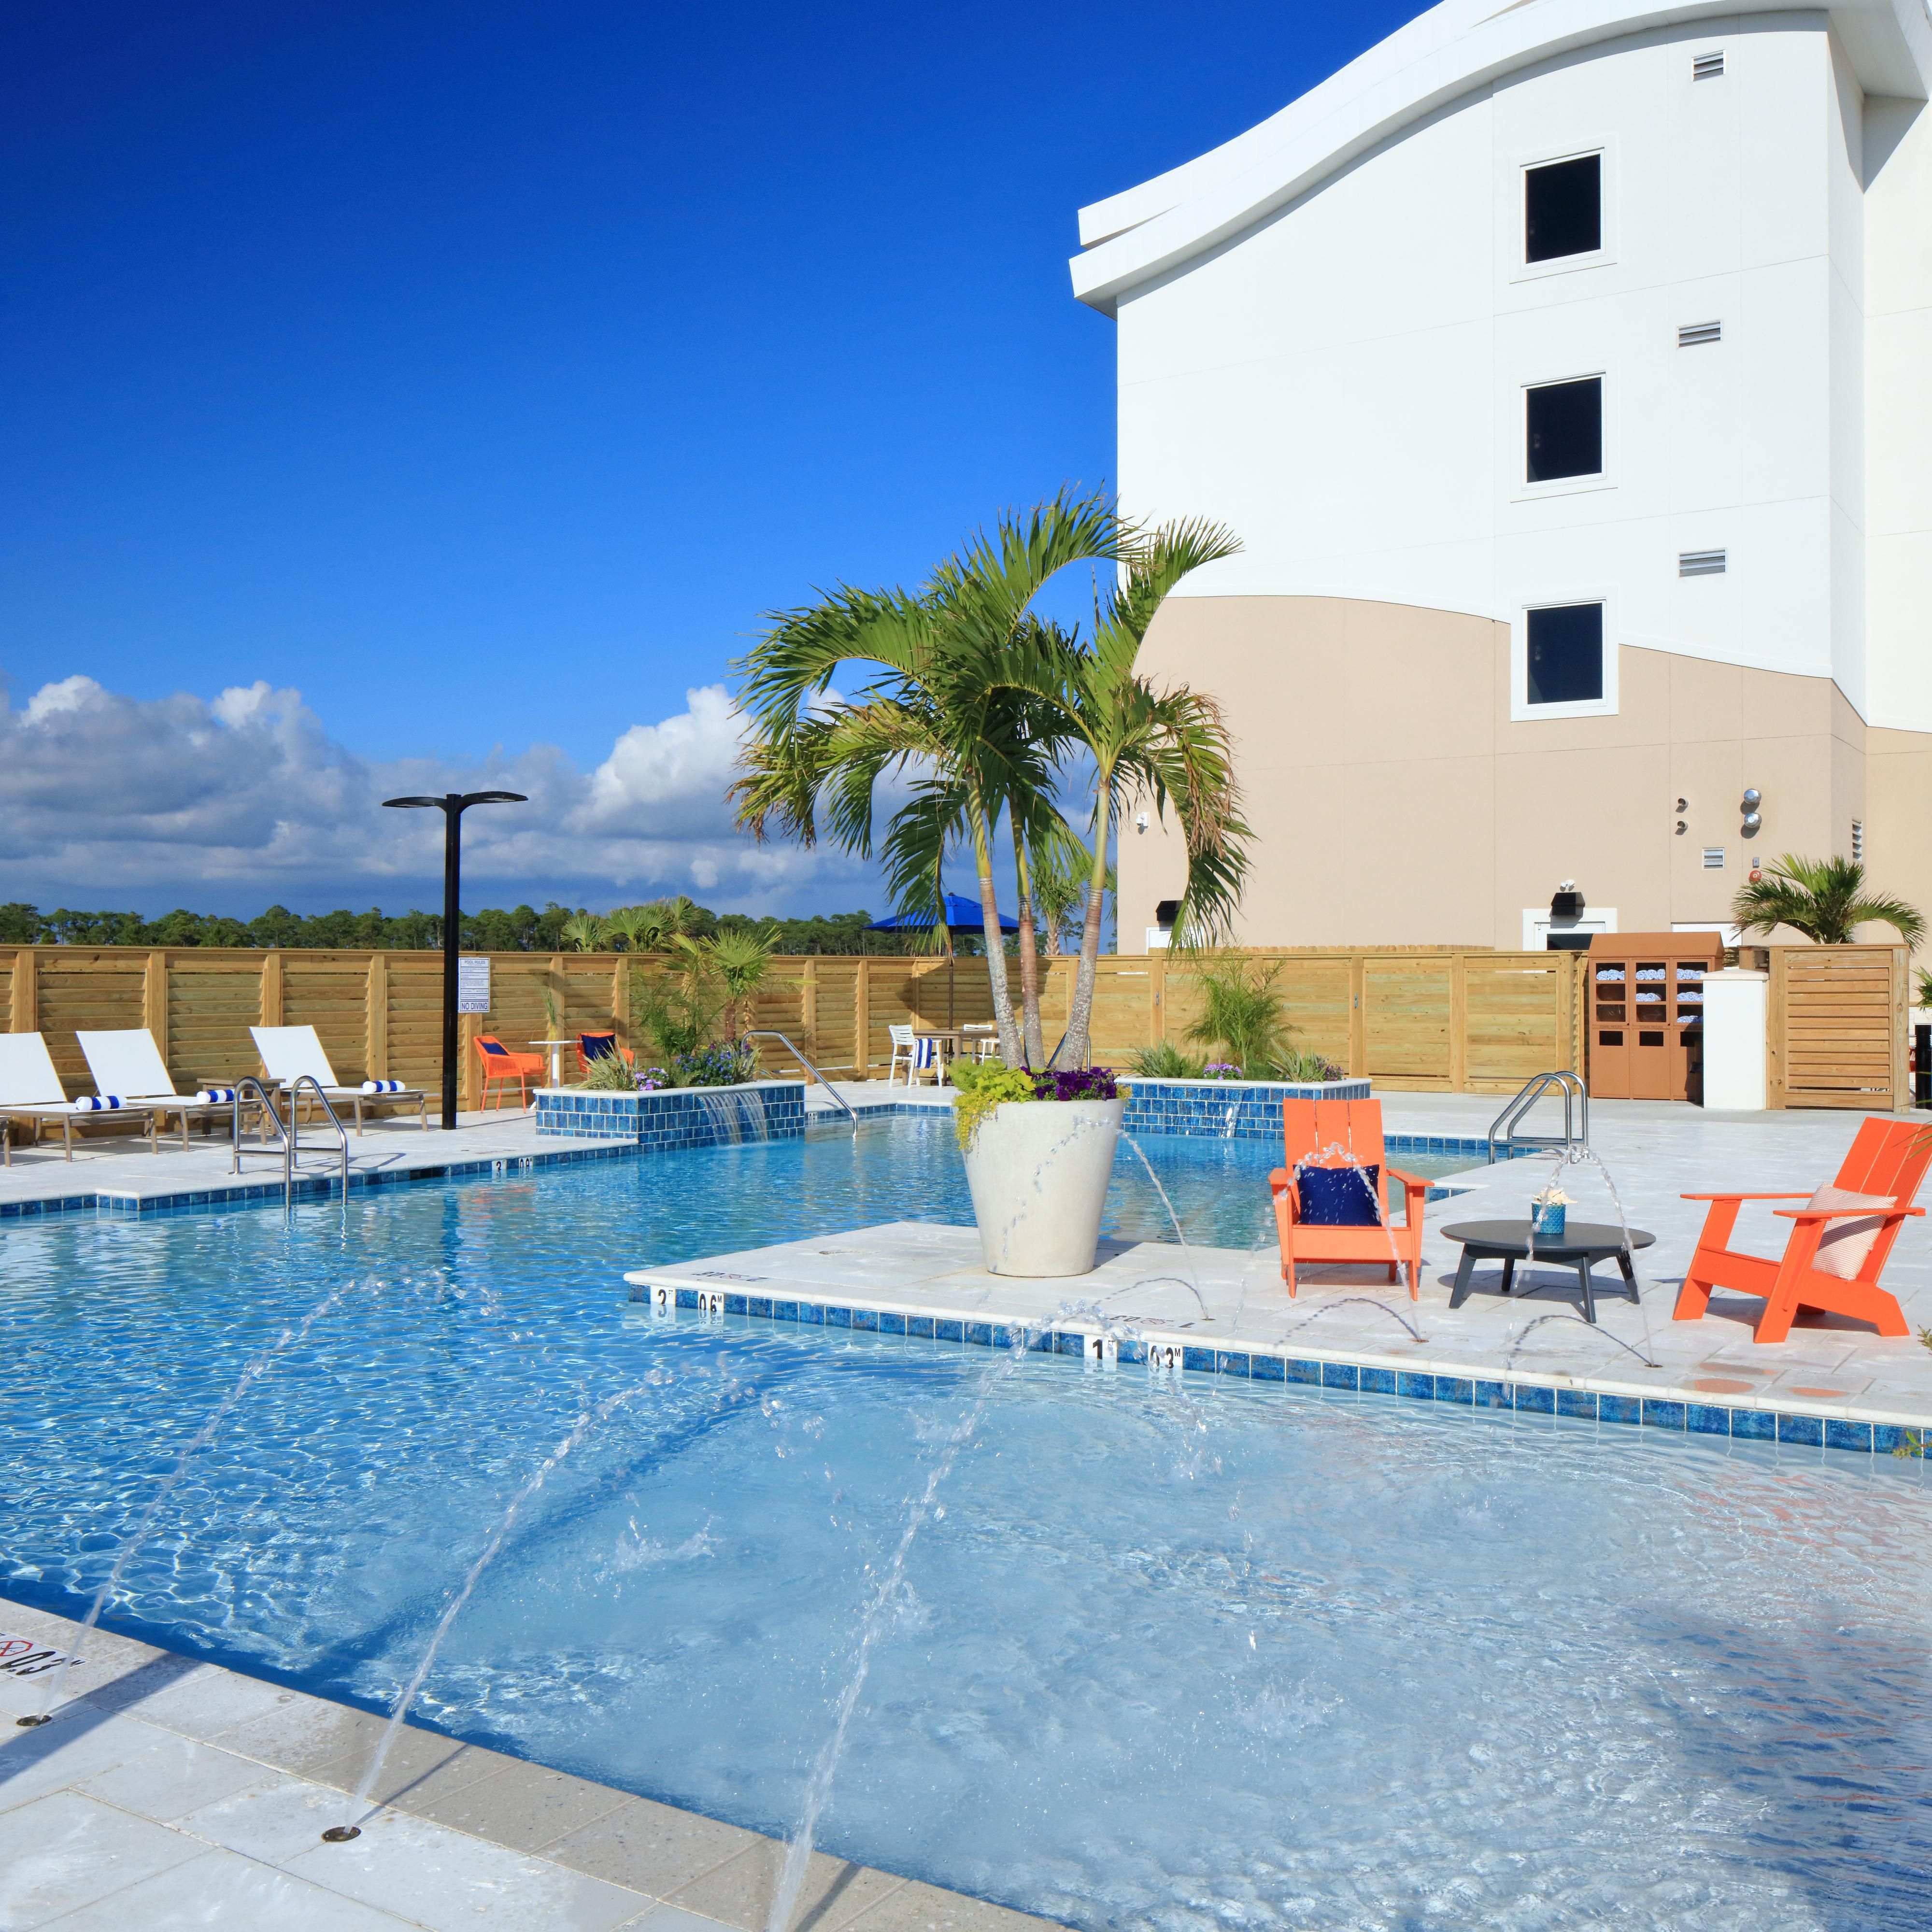 Take a dip in our large outdoor pool